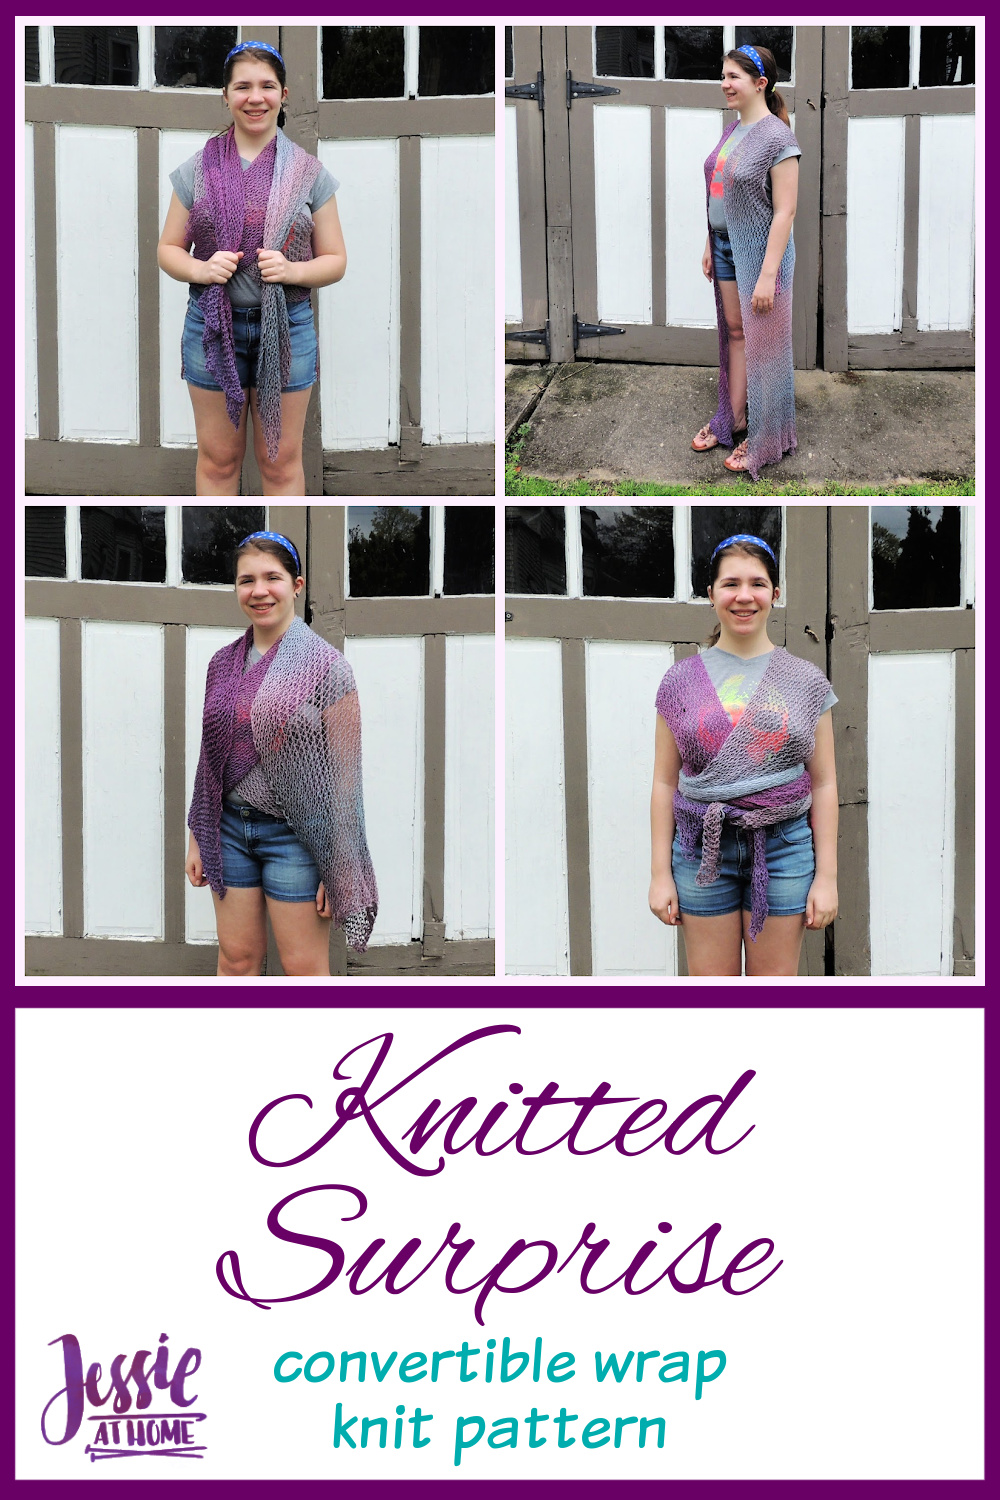 Knitted Surprise - convertible wrap knit pattern